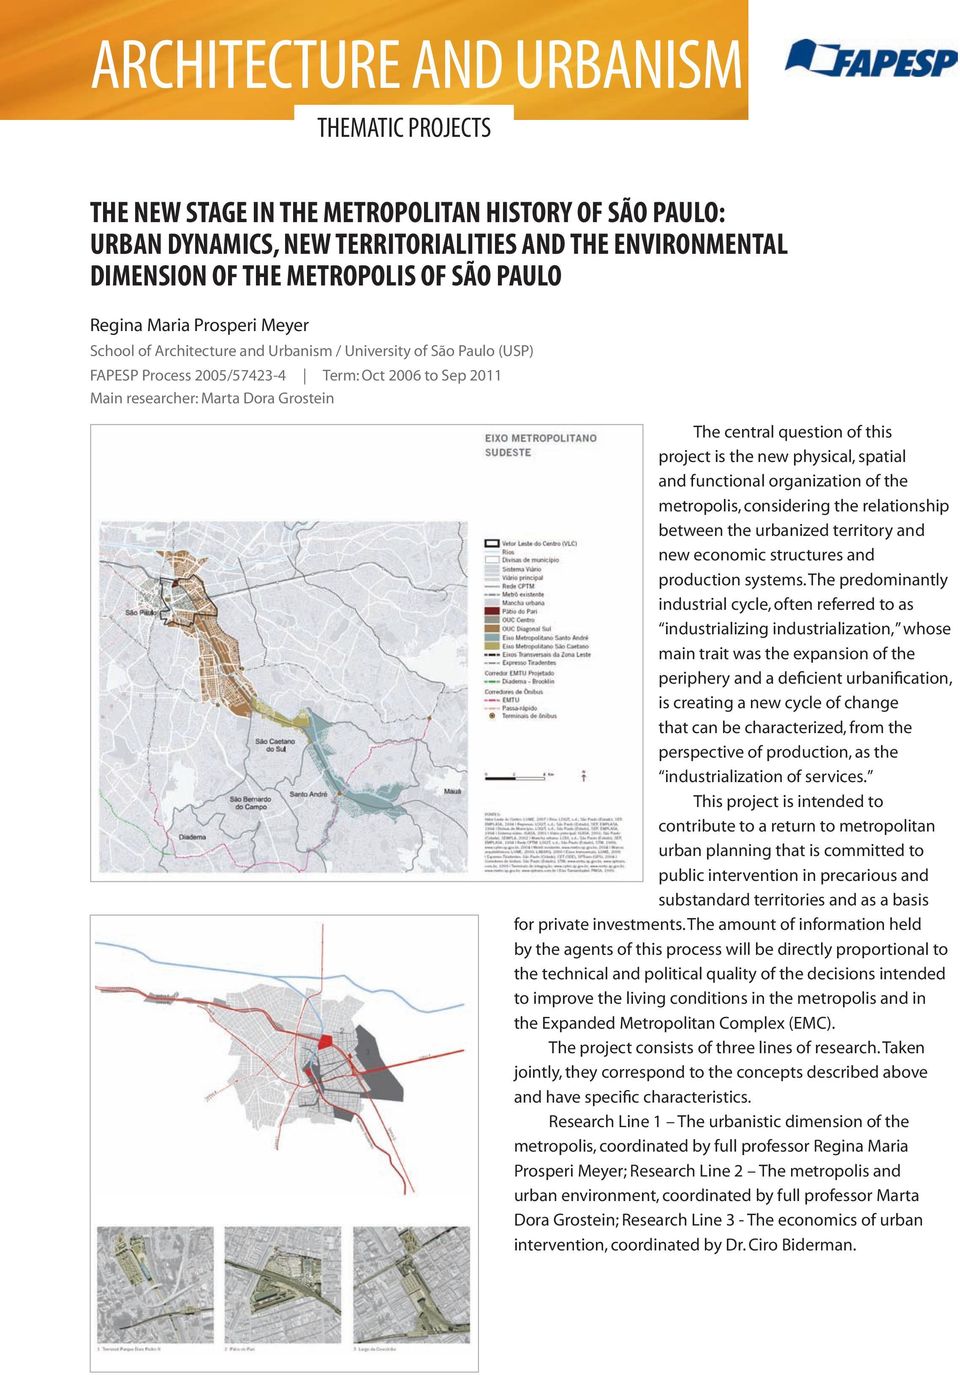 question of this project is the new physical, spatial and functional organization of the metropolis, considering the relationship between the urbanized territory and new economic structures and